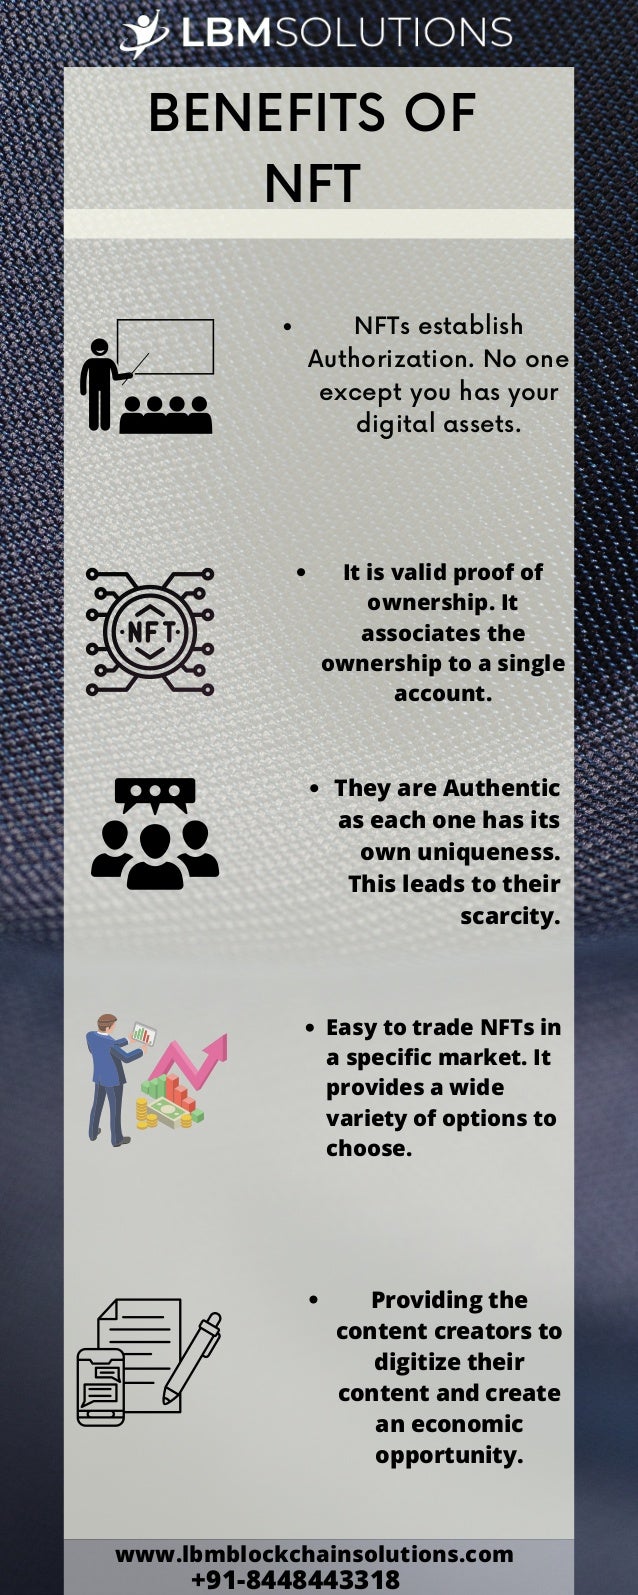 BENEFITS OF
NFT


NFTs establish
Authorization. No one
except you has your
digital assets.
It is valid proof of
ownership. It
associates the
ownership to a single
account.
They are Authentic
as each one has its
own uniqueness.
This leads to their
scarcity.
Easy to trade NFTs in
a specific market. It
provides a wide
variety of options to
choose.
Providing the
content creators to
digitize their
content and create
an economic
opportunity.
www.lbmblockchainsolutions.com
+91-8448443318
 